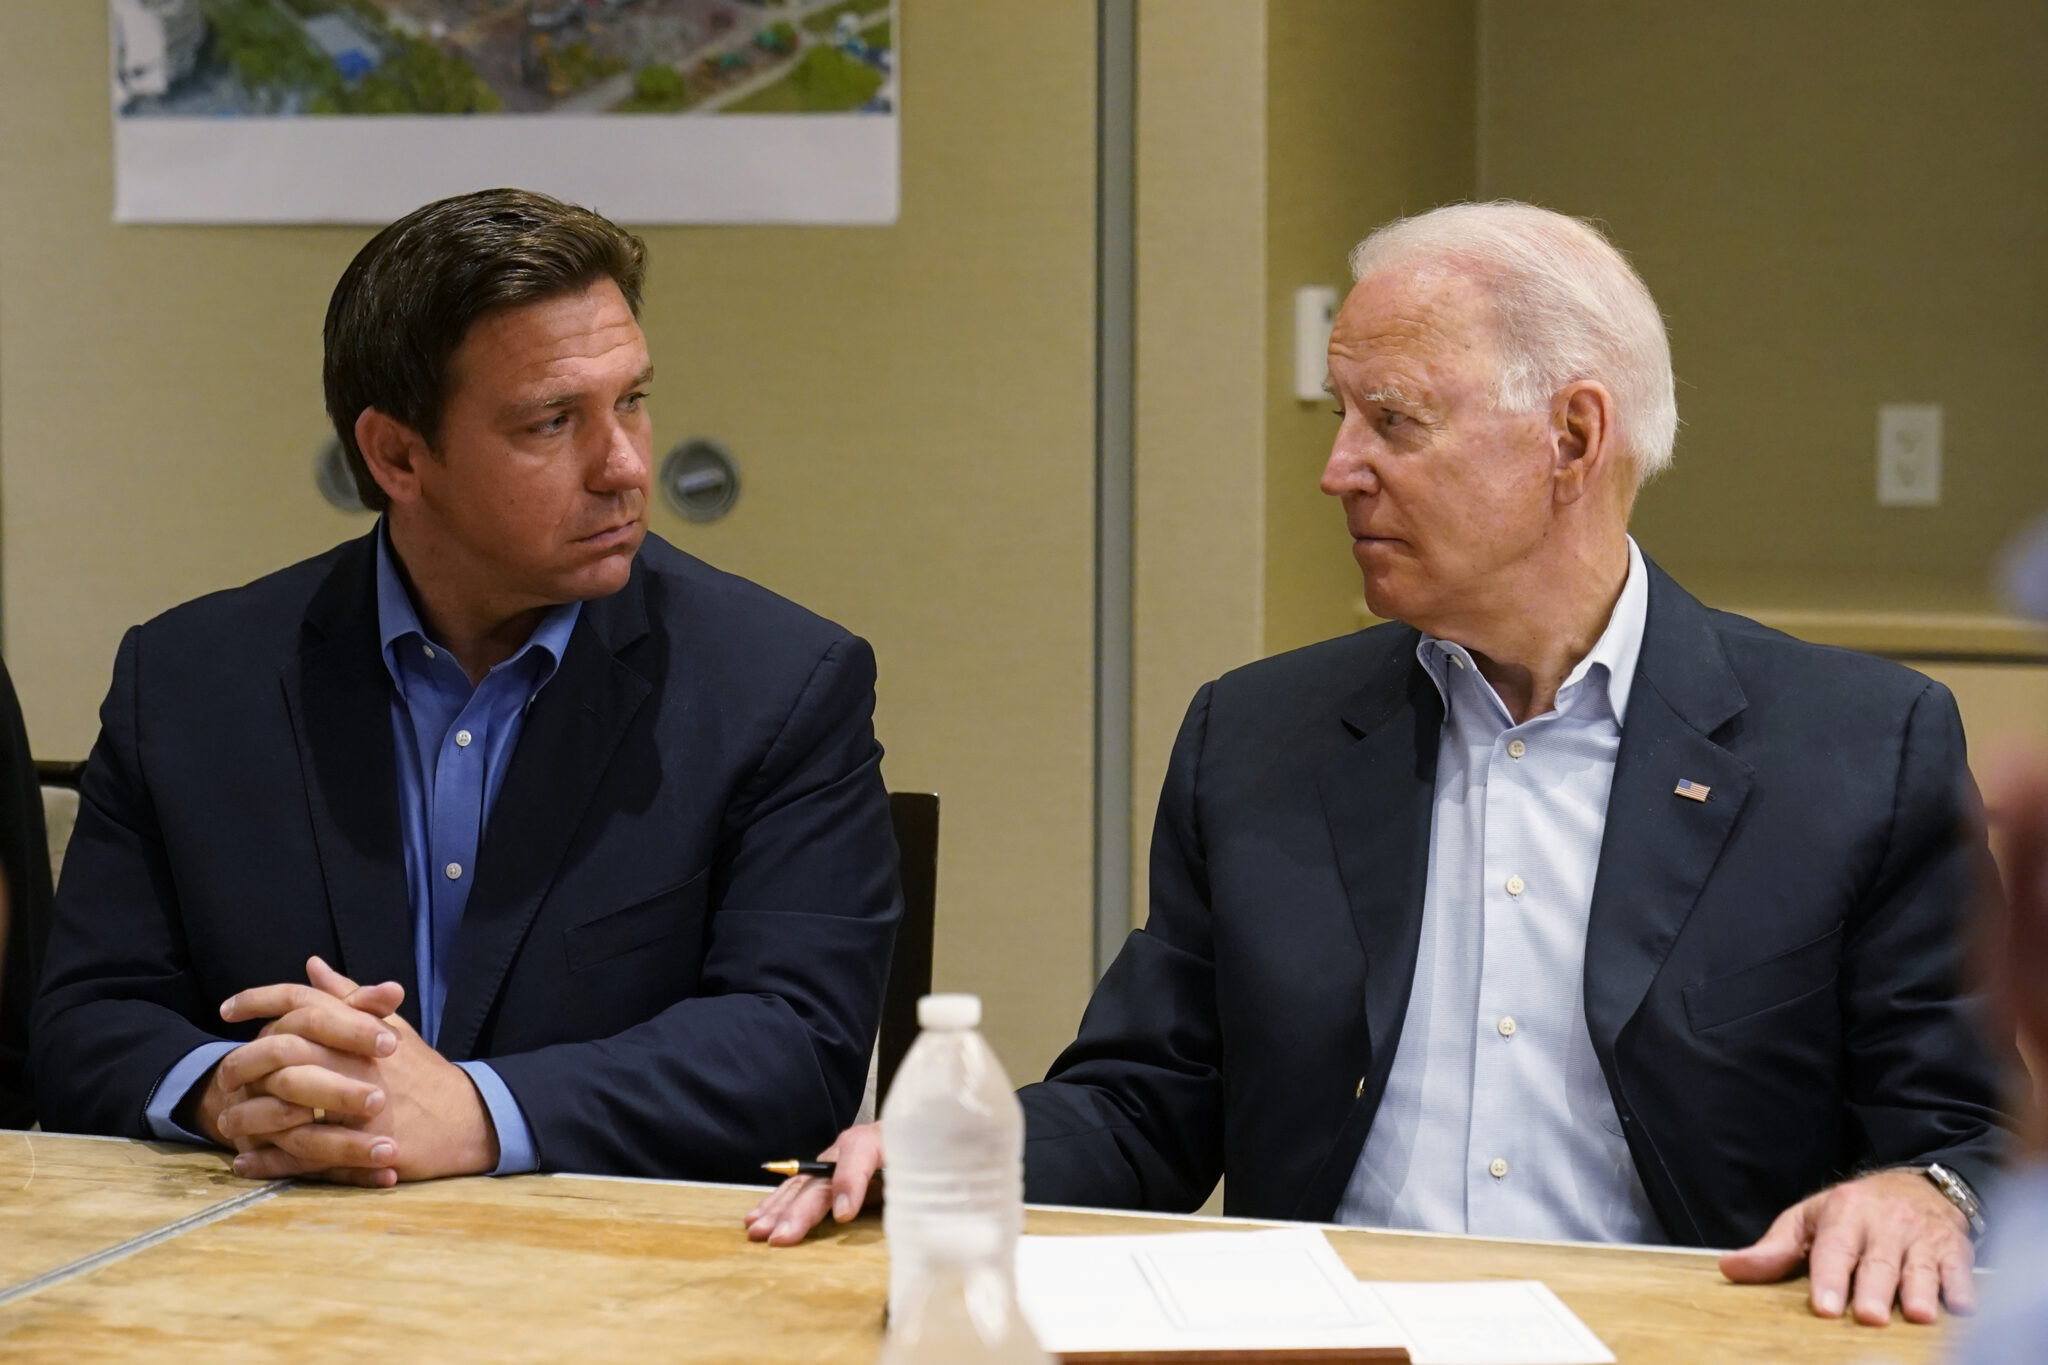 FILE - In this July 1, 2021, file photo President Joe Biden, right, looks at Florida Gov. Ron DeSantis, left, during a briefing with first responders and local officials in Miami on the condo tower that collapsed in Surfside, Fla. As he prepares for a reelection bid next year that could propel him into a presidential campaign, the tragedy in Surfside is exposing voters to a different side of DeSantis. (AP Photo/Susan Walsh, File)